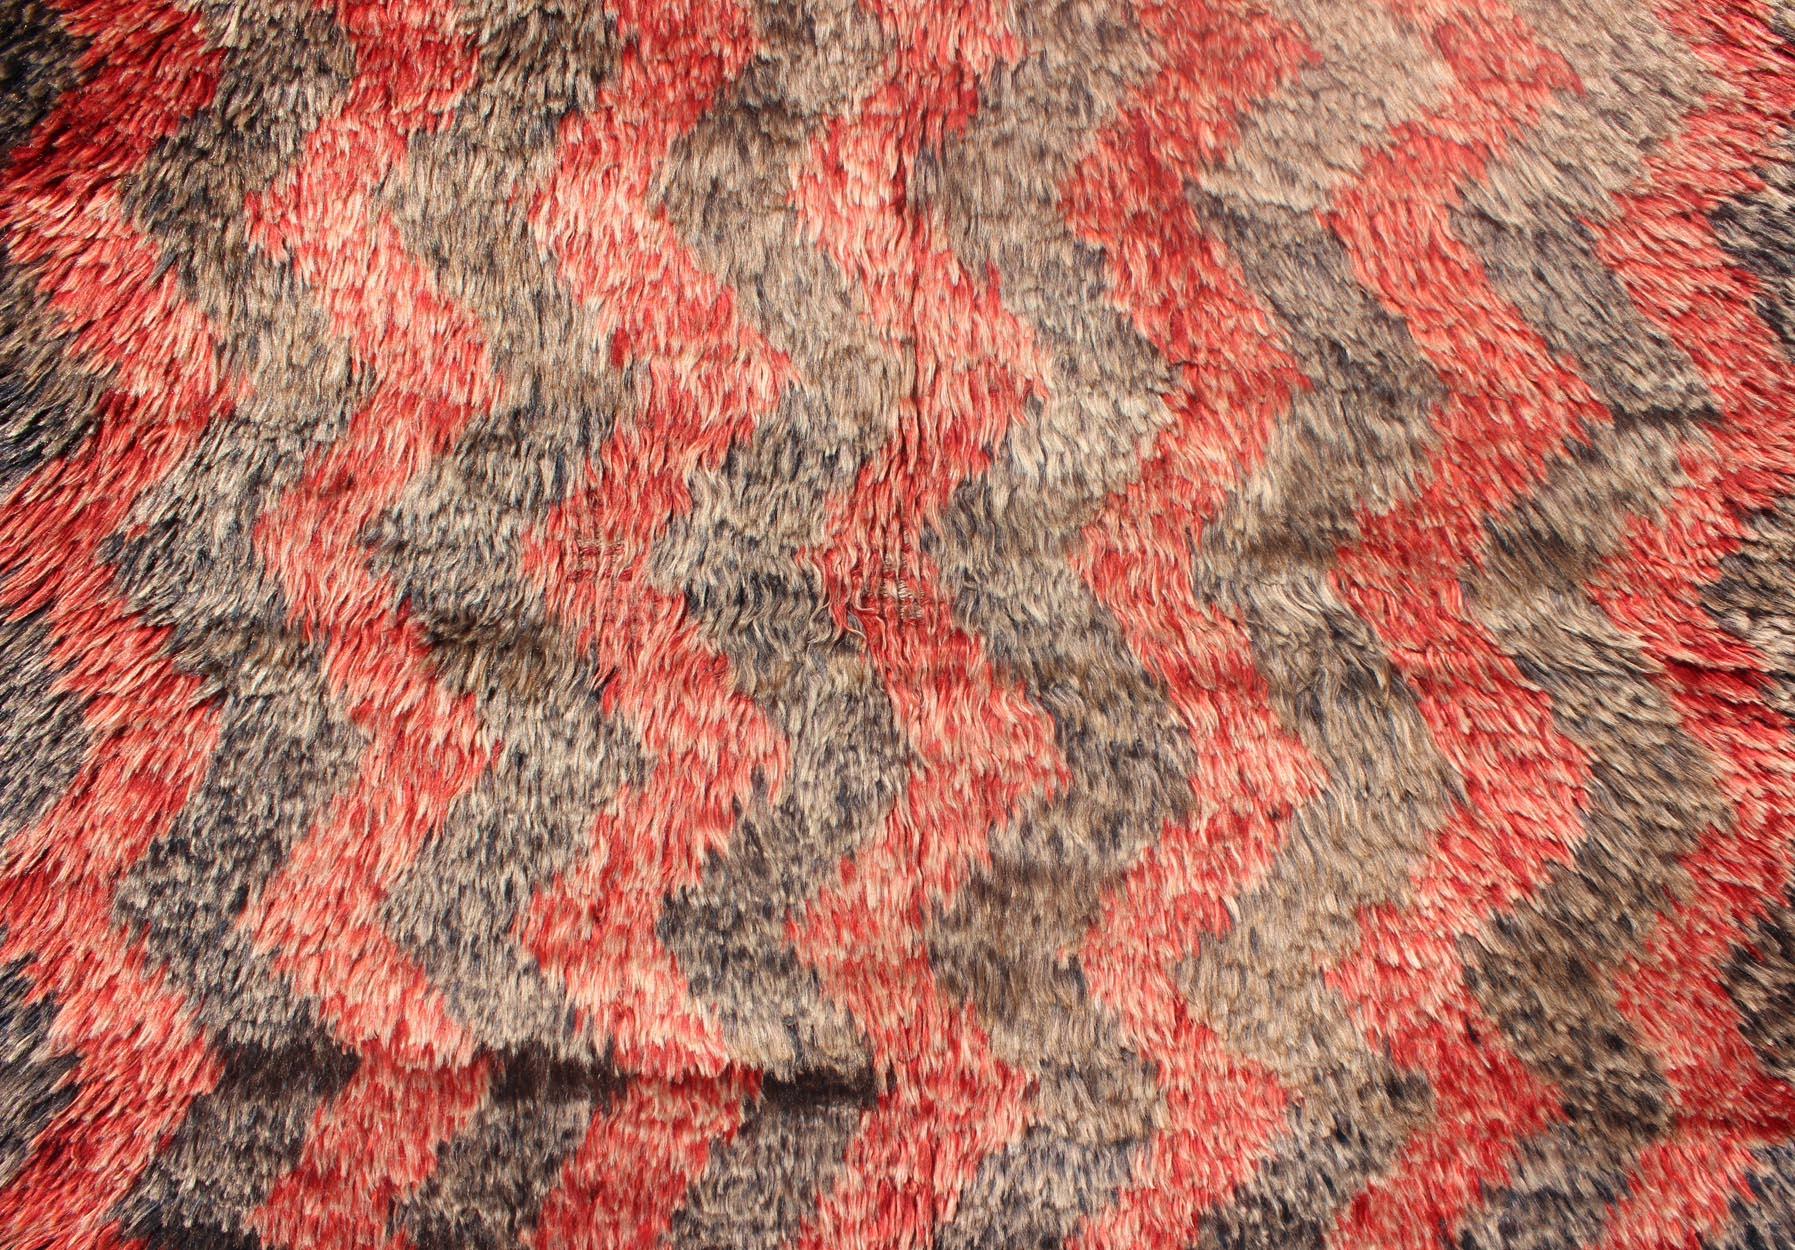 Turkish Tulu Carpet with Zig-Zag Stripe Pattern in Gray, Charcoal and Red 4